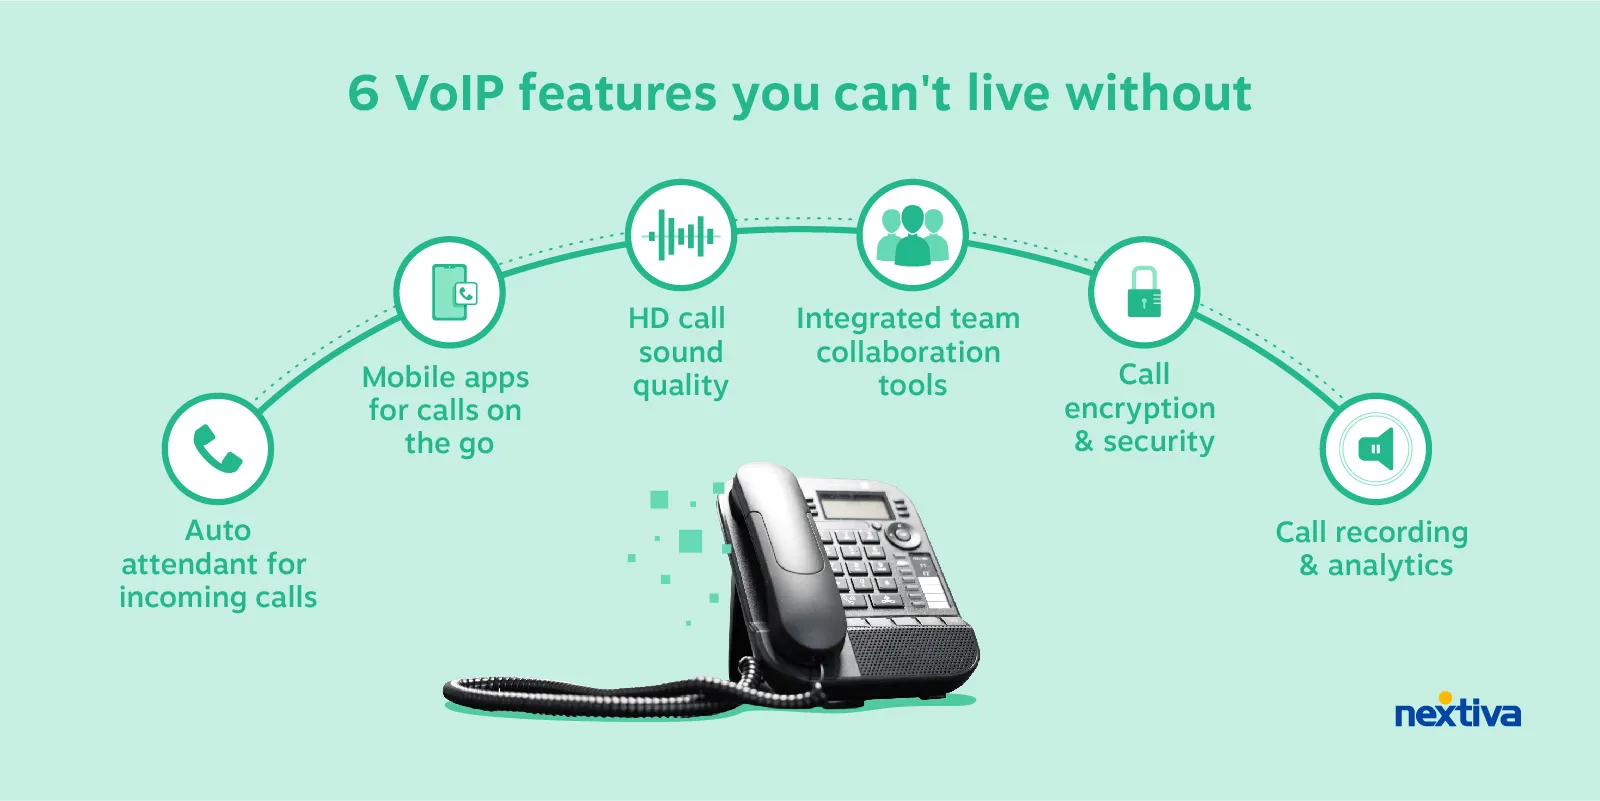 VoIP features